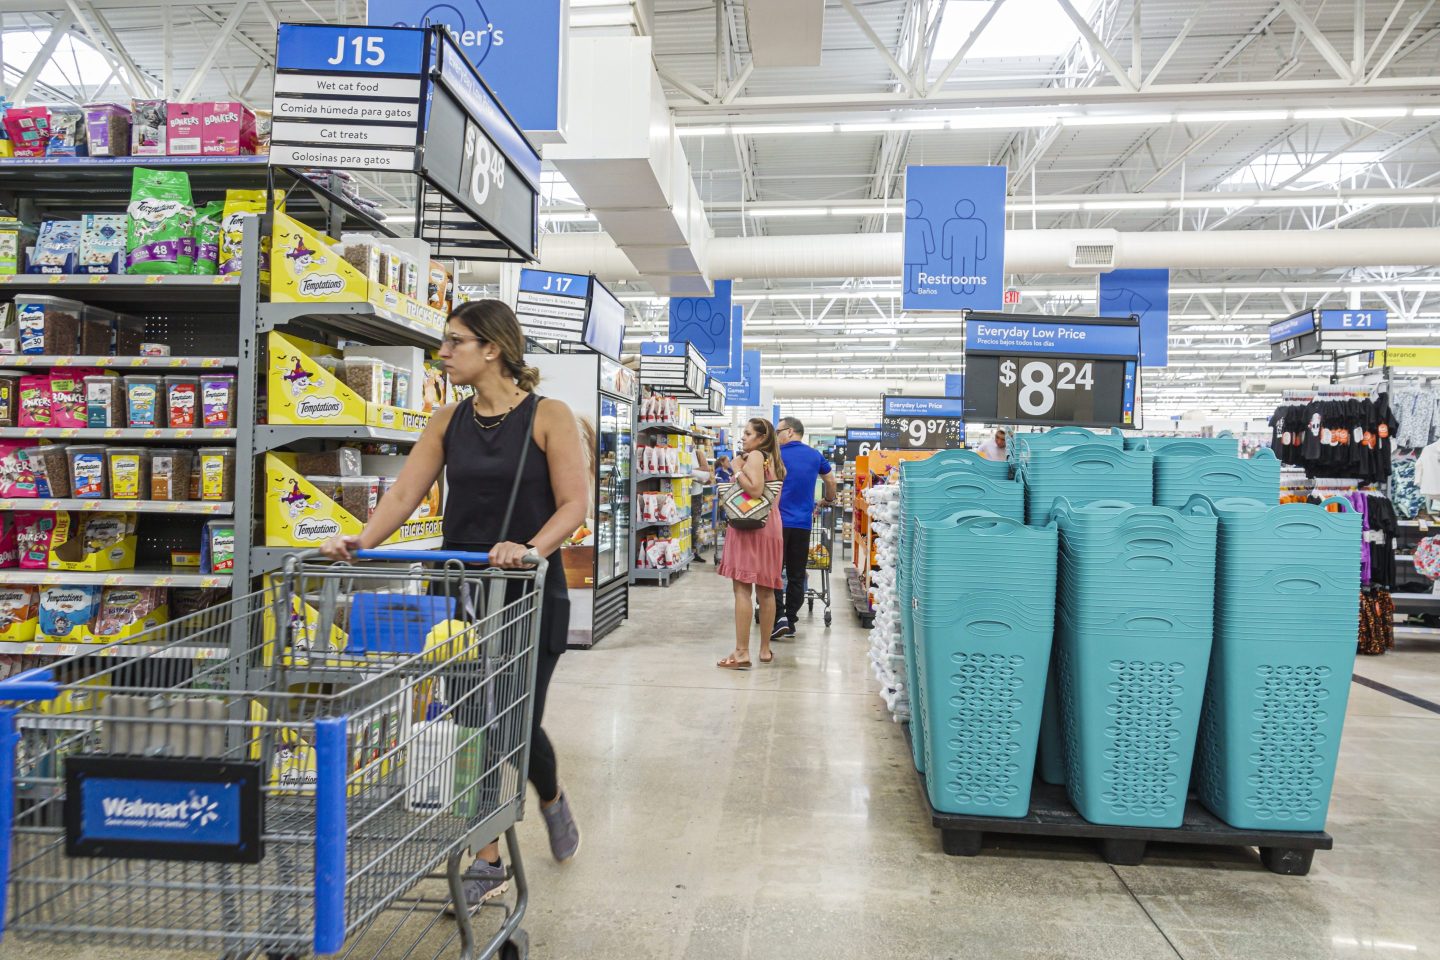 Miami, Hialeah Gardens, Florida, Walmart Supercenter, woman shopping g with shopping cart. (Photo by: Jeffrey Greenberg/Universal Images Group via Getty Images)